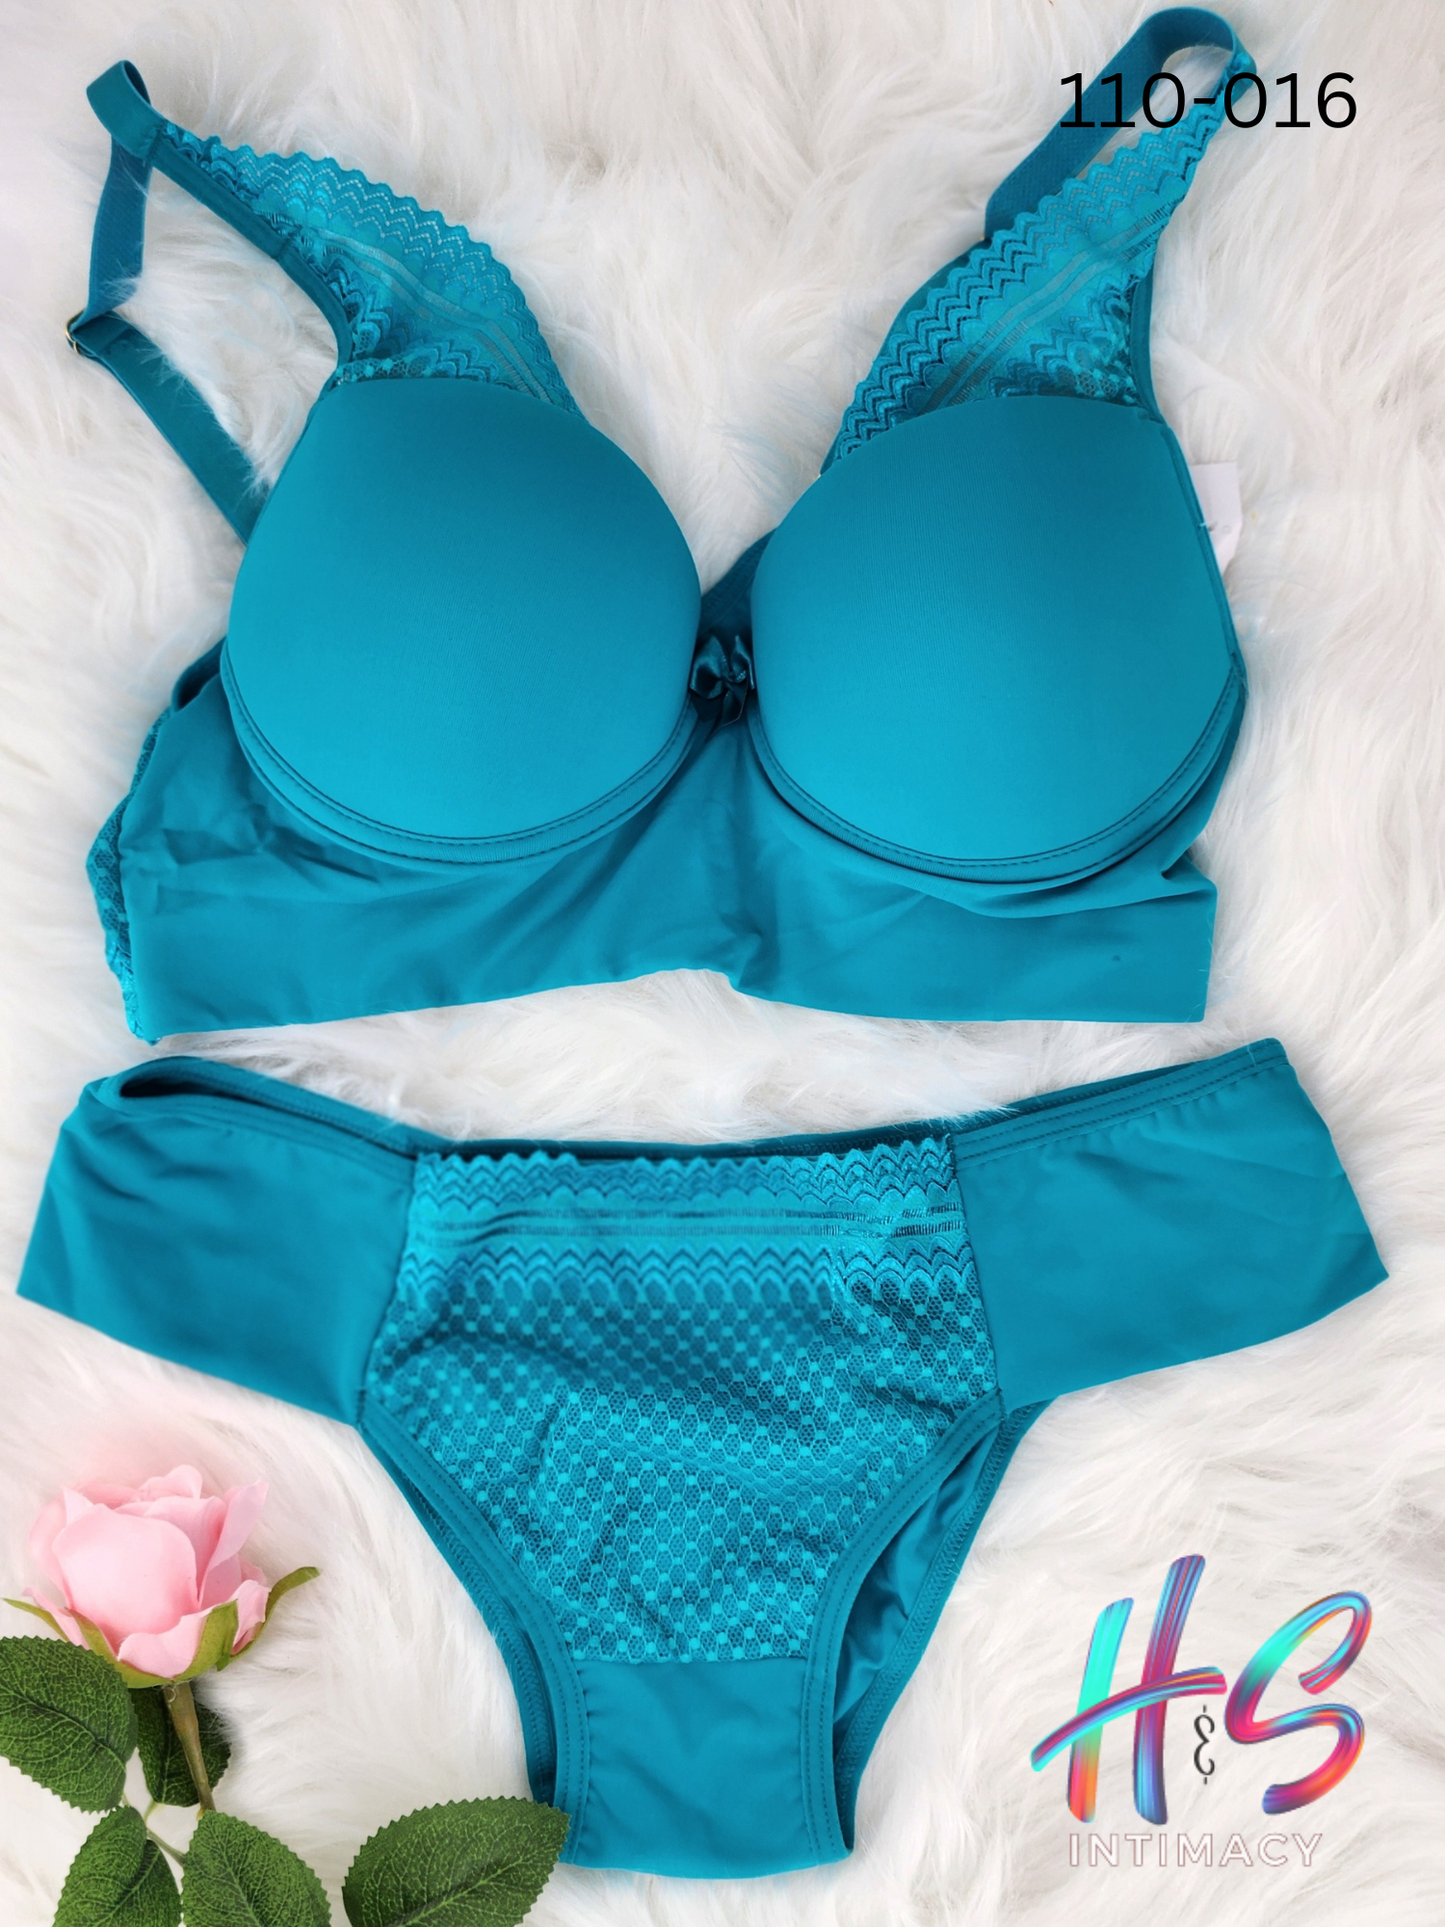 H&S Lingerie Collection 110-016